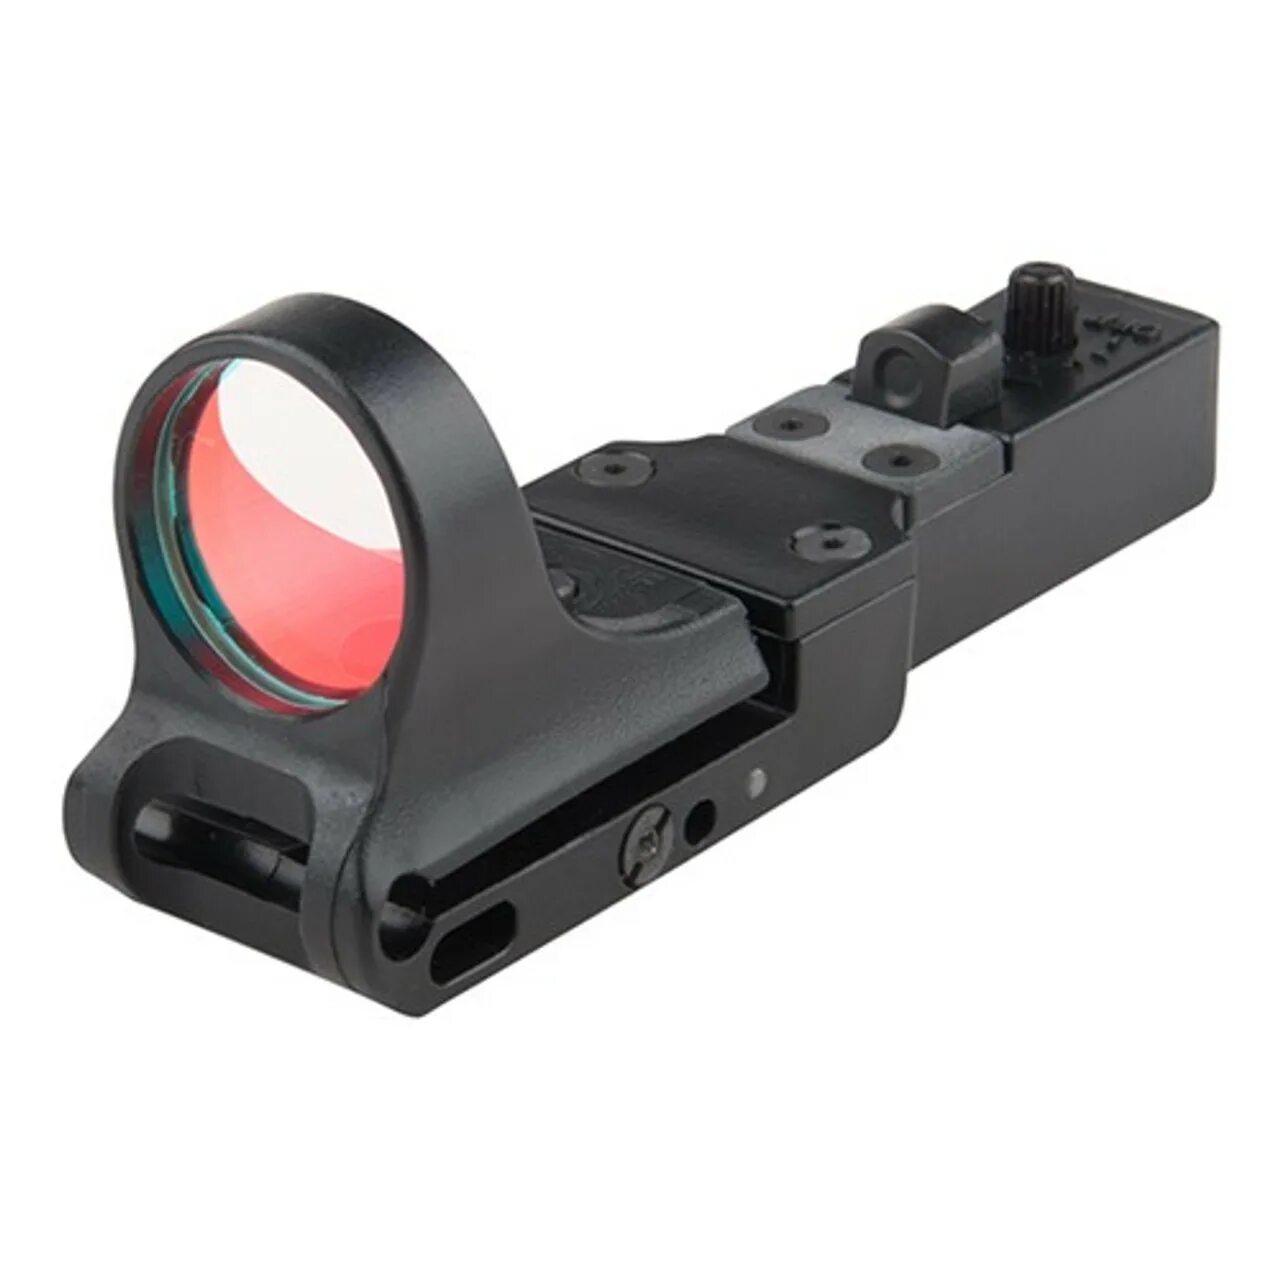 C more systems. C-more прицел. C-more Red Dot Sight. Yongnuo perfect Red Dot прицел. Red Dot.